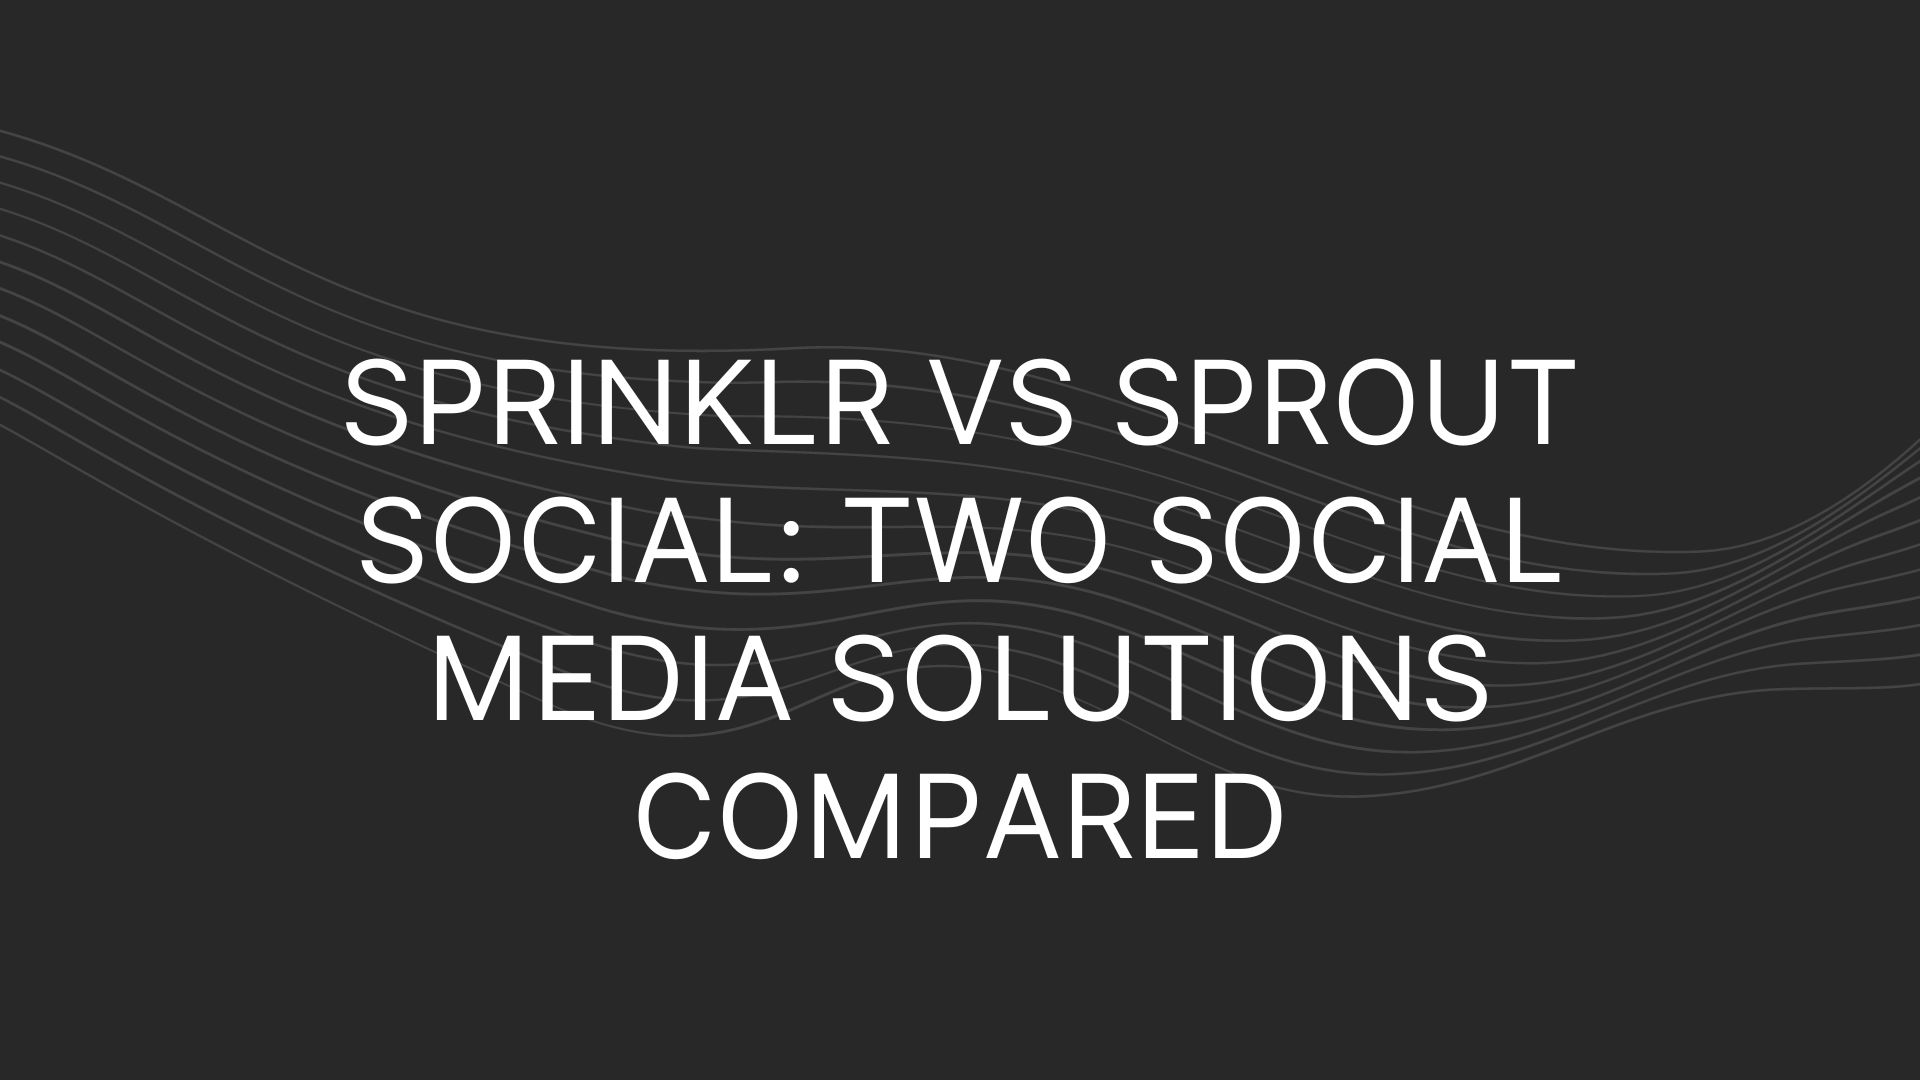 Sprinklr vs Sprout Social: Two Social Media Solutions Compared